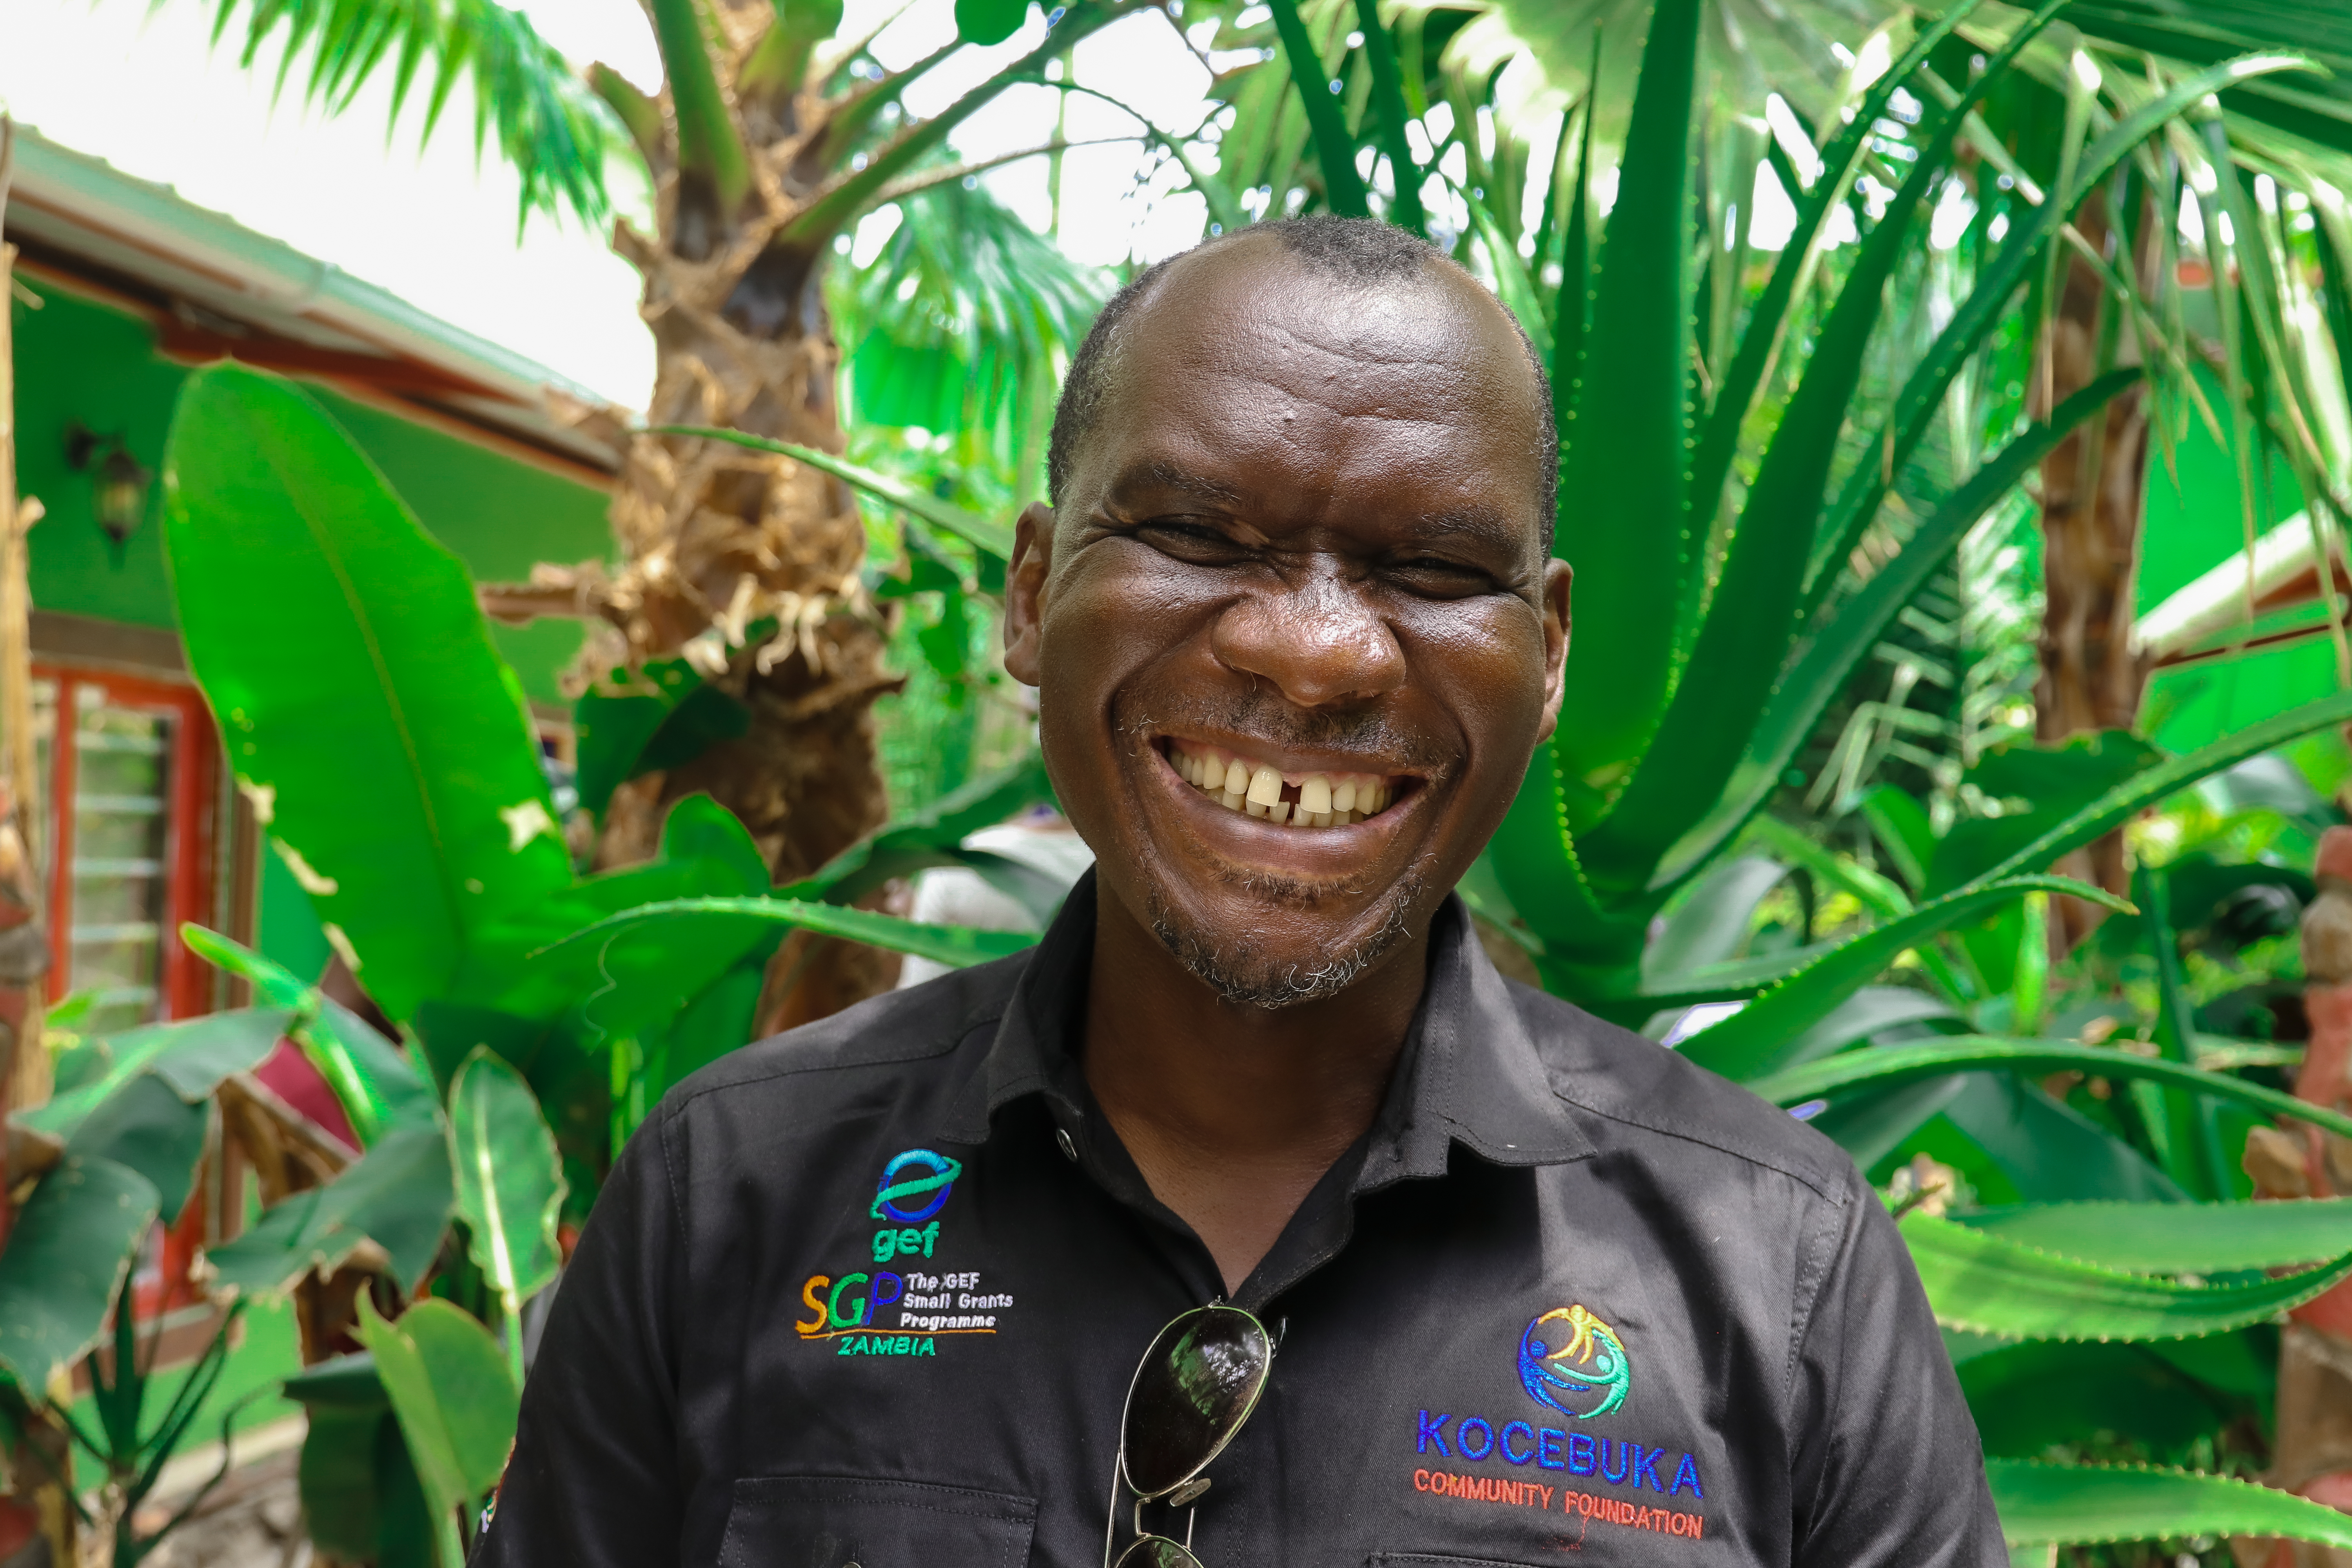 Image of Paswell Nyambe, the Programme Manager for the Kocebuka Community Foundation